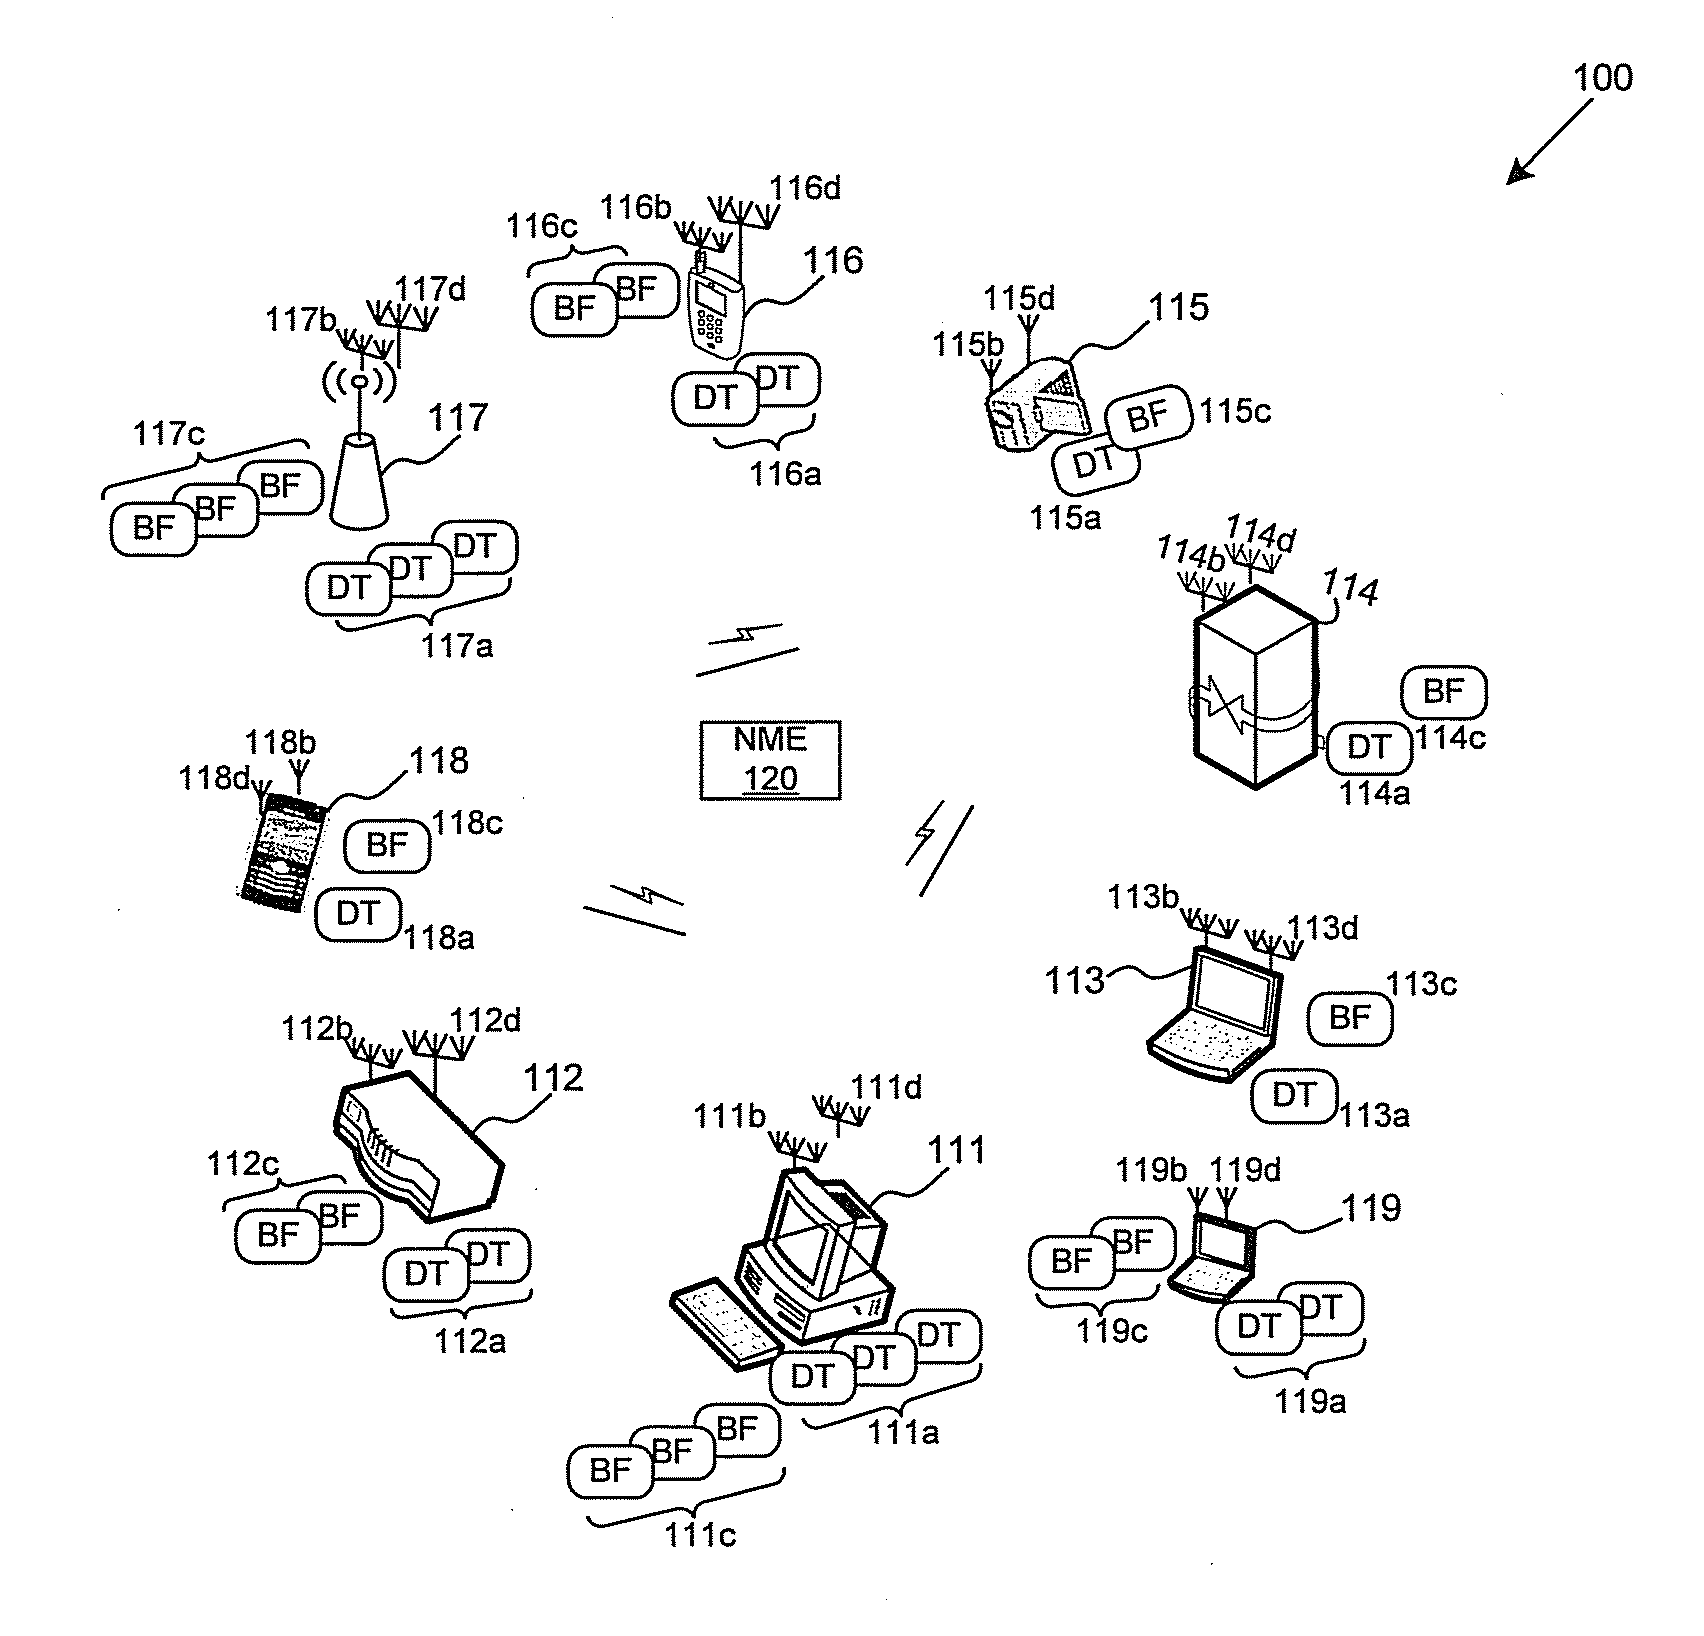 Method and system for high-throughput and low-power communication links in a distributed transceiver network